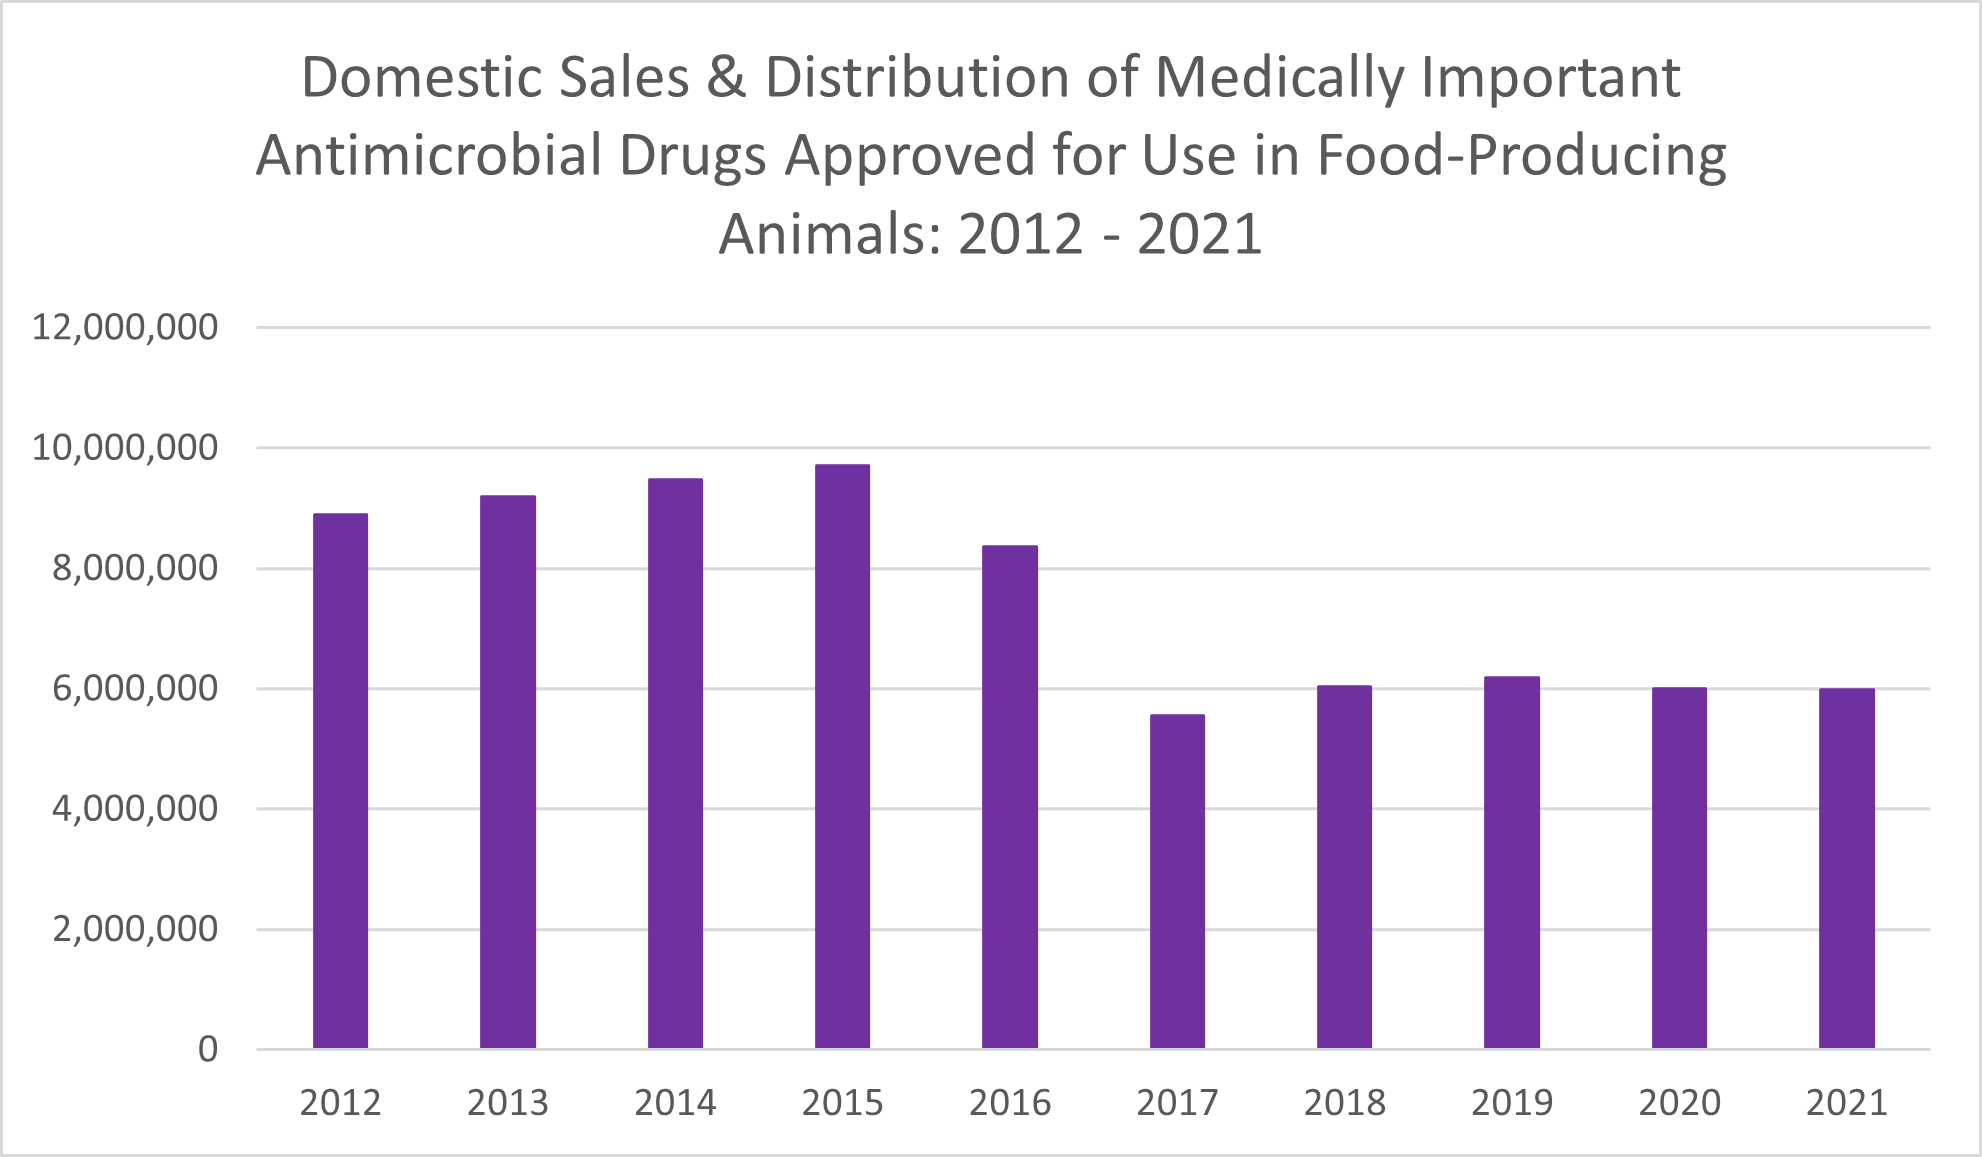 This bar graph provides the total annual domestic sales and distribution data of medically important antimicrobial drugs approved for use in food-producing animals between 2011 and 2020. Annual totals (kg) of active ingredient are as follows: 2012: 8897420; 2013: 9193293; 2014: 9479339; 2015: 9702943; 2016: 8356340; 2017: 5559212; 2018: 6032298; 2019: 6189260; 2020: 6002056; 2021: 5989721.